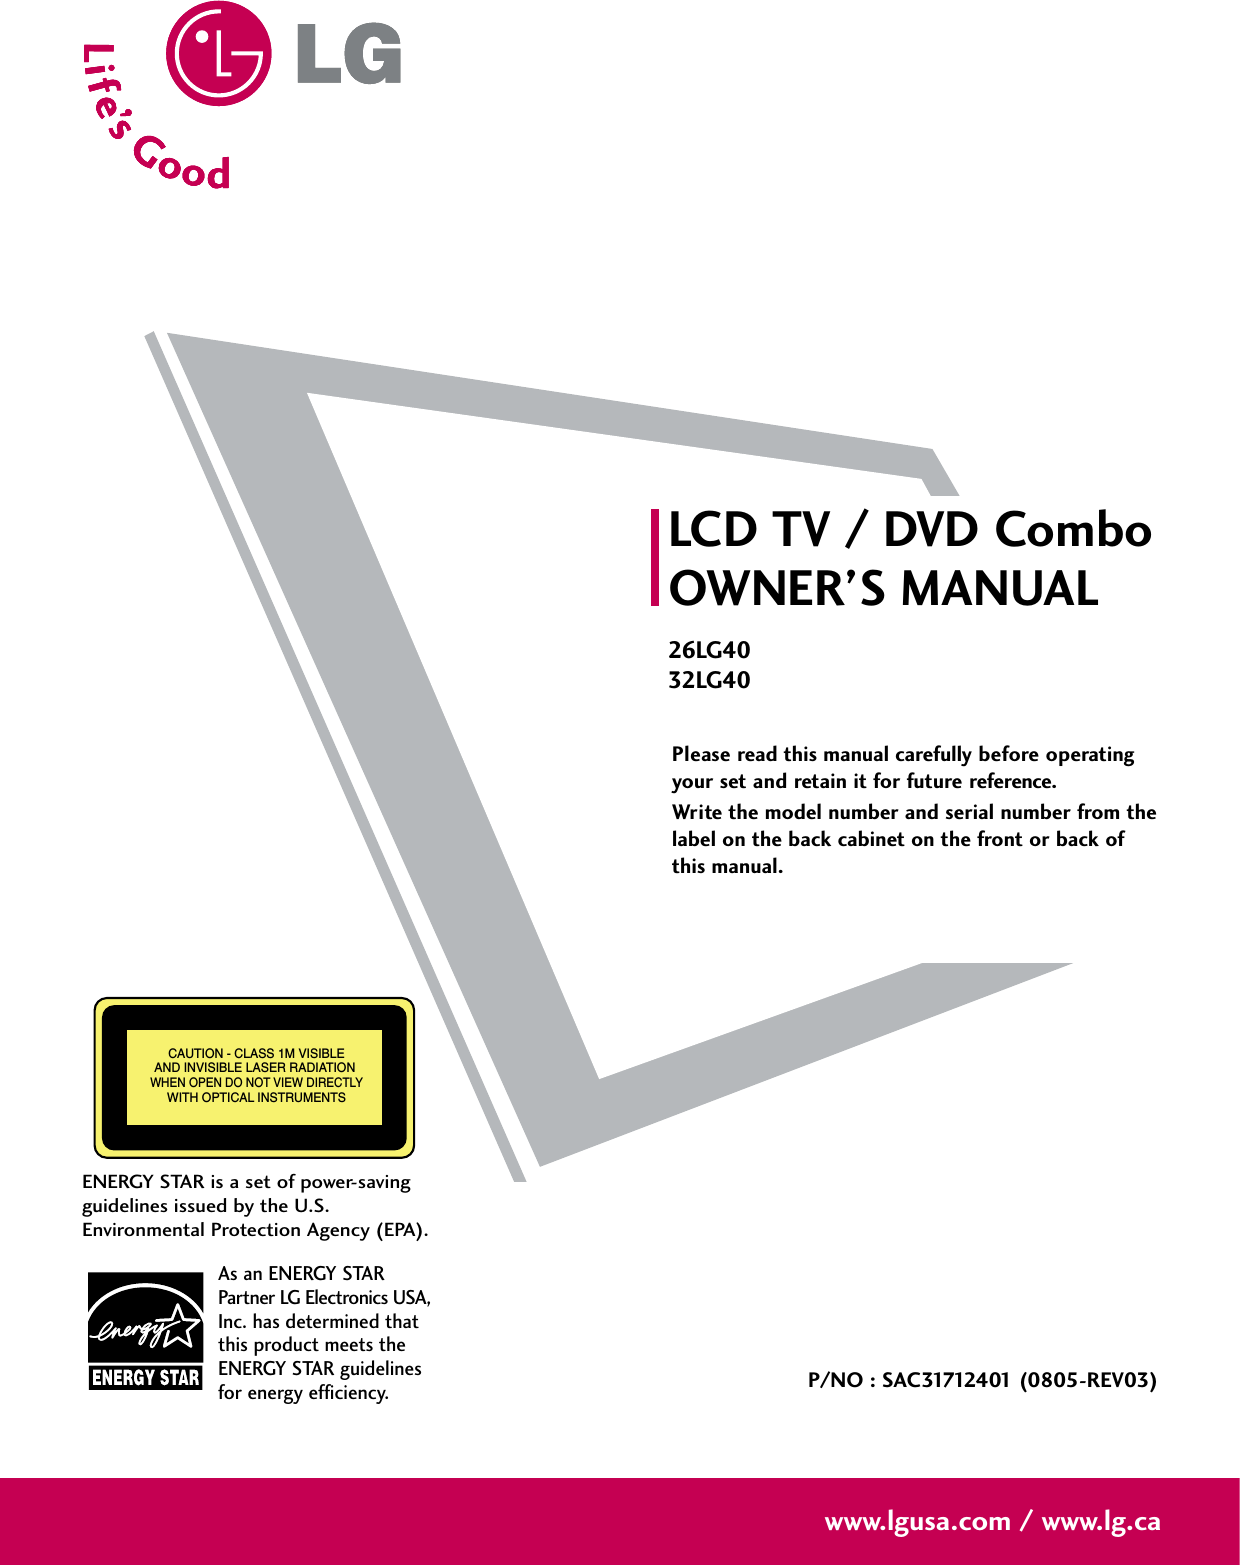 Please read this manual carefully before operatingyour set and retain it for future reference.Write the model number and serial number from thelabel on the back cabinet on the front or back ofthis manual. LCD TV / DVD ComboOWNER’S MANUAL26LG4032LG40P/NO : SAC31712401 (0805-REV03)www.lgusa.com / www.lg.caAs an ENERGY STARPartner LG Electronics USA,Inc. has determined thatthis product meets theENERGY STAR guidelinesfor energy efficiency.CAUTION - CLASS 1M VISIBLEAND INVISIBLE LASER RADIATION WHEN OPEN DO NOT VIEW DIRECTLYWITH OPTICAL INSTRUMENTSENERGY STAR is a set of power-savingguidelines issued by the U.S.Environmental Protection Agency (EPA).